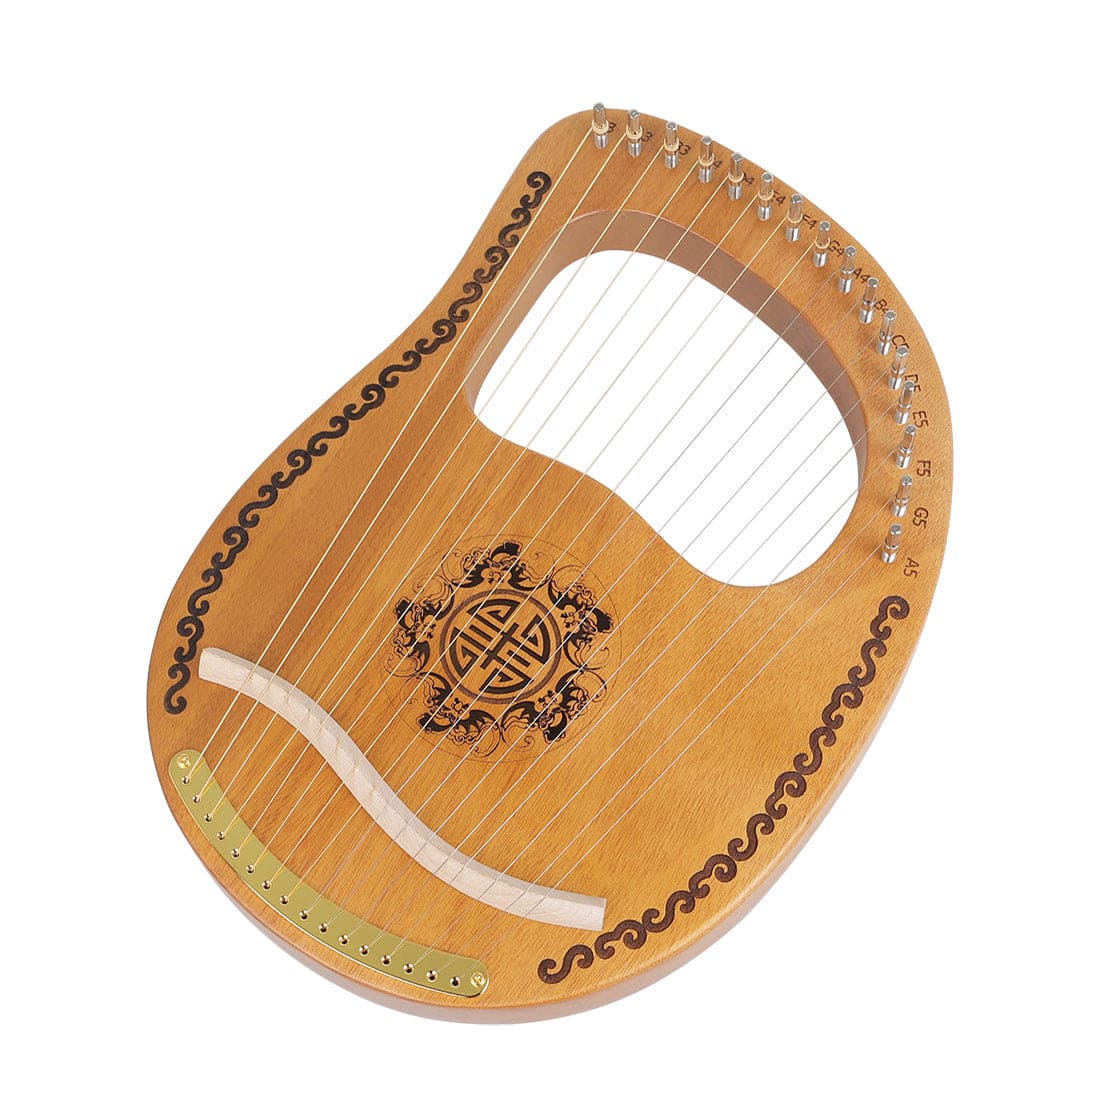 Small Harp, Small Portable Niche, Simple And Easy To Learn Musical Instrument